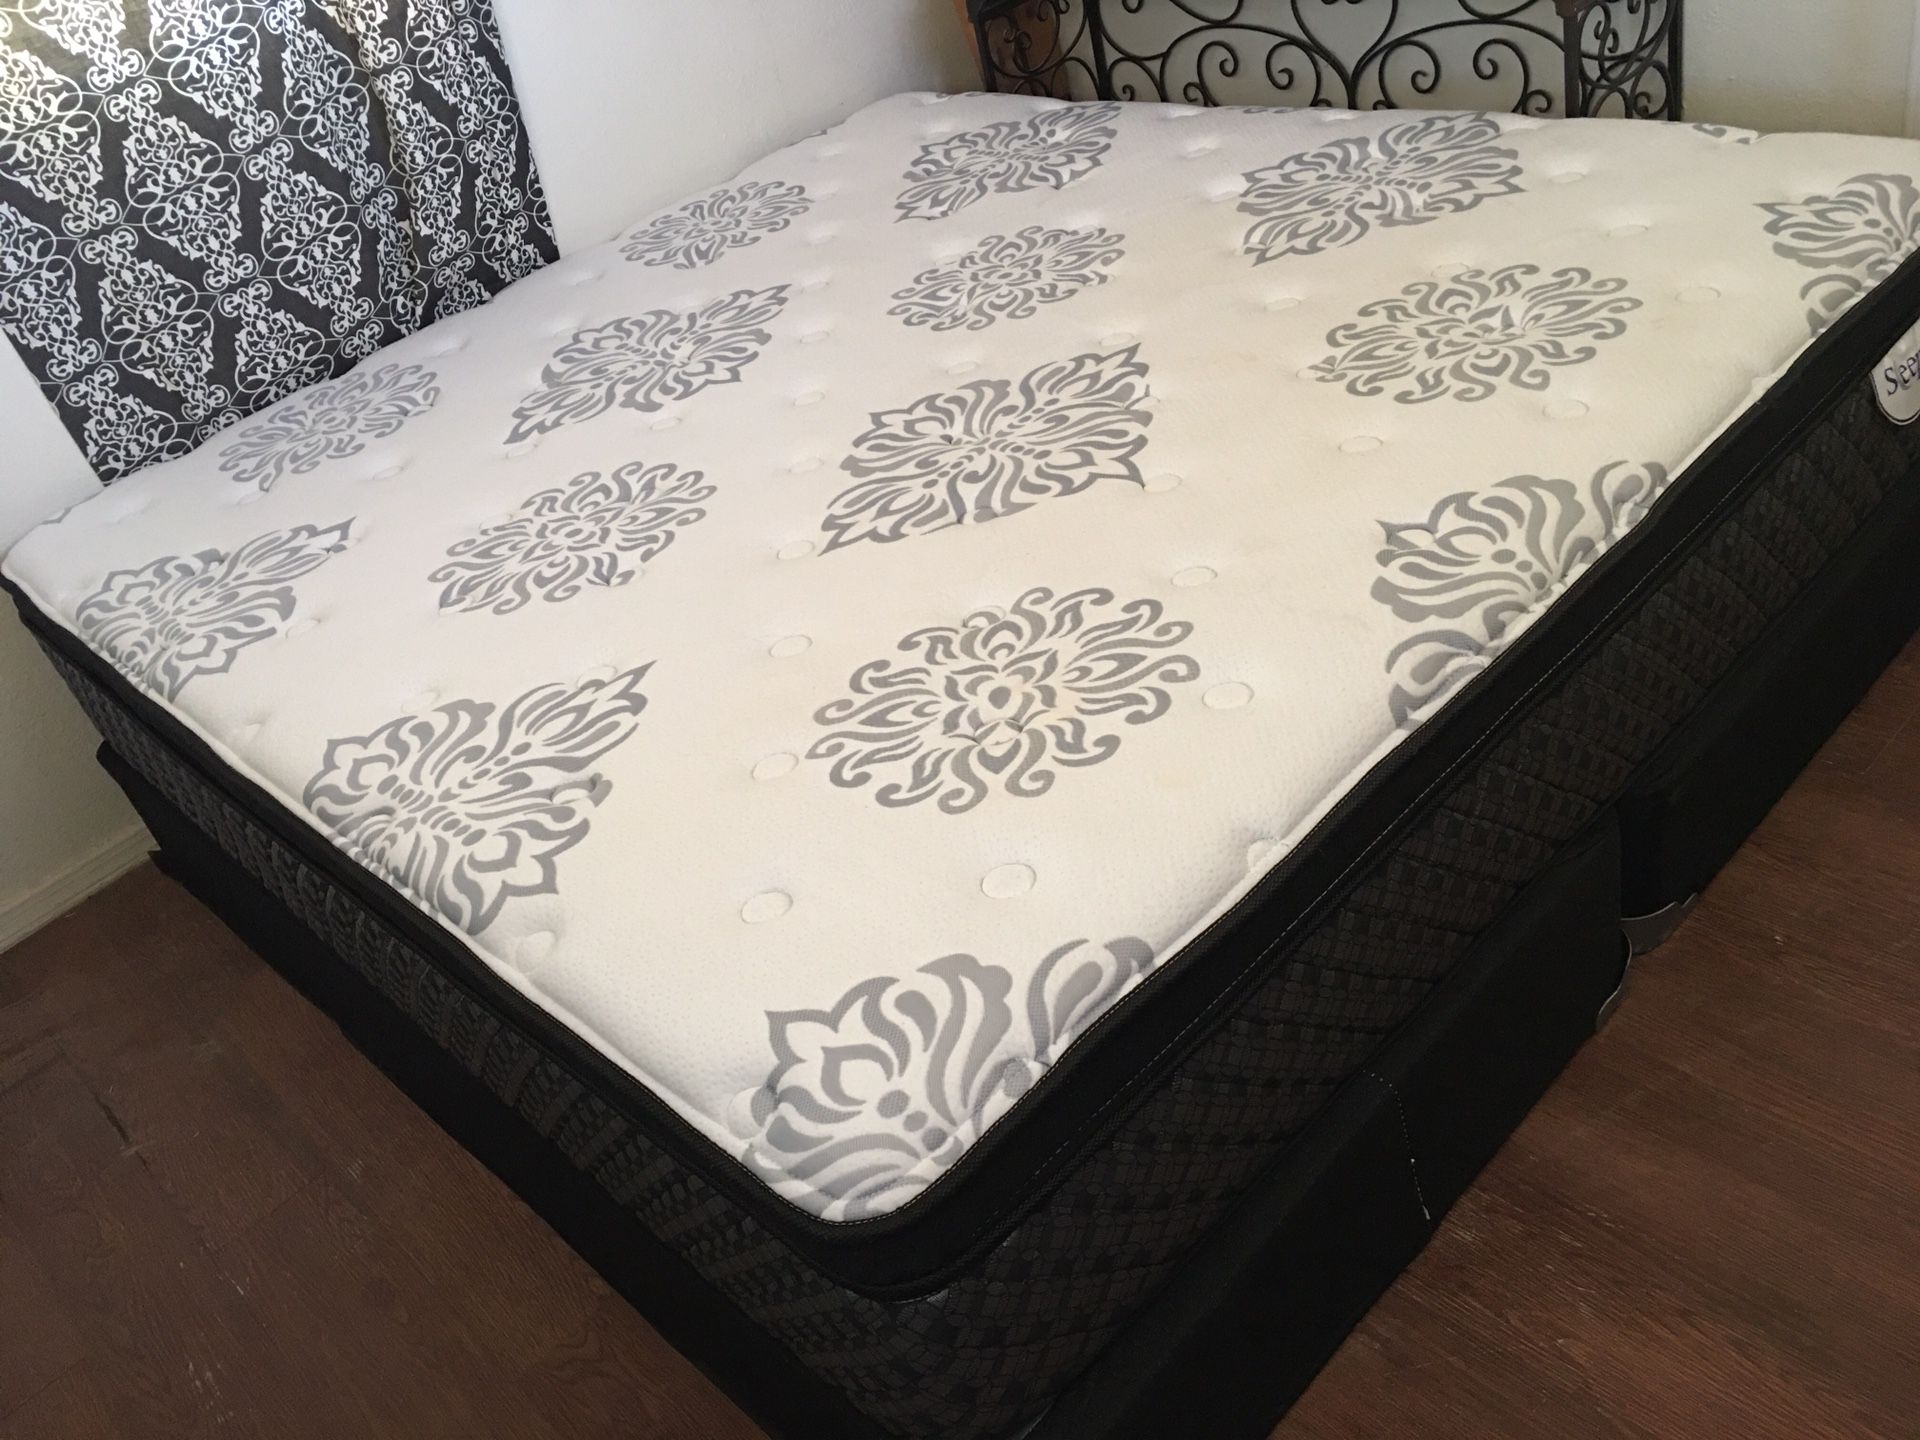 LIKE NEW SIX MONTHS OLD KING SIZE PILLOW TOP MATTRESS AND BOX SPRINGS-COMO NUEVA SEIS MESES DE USO